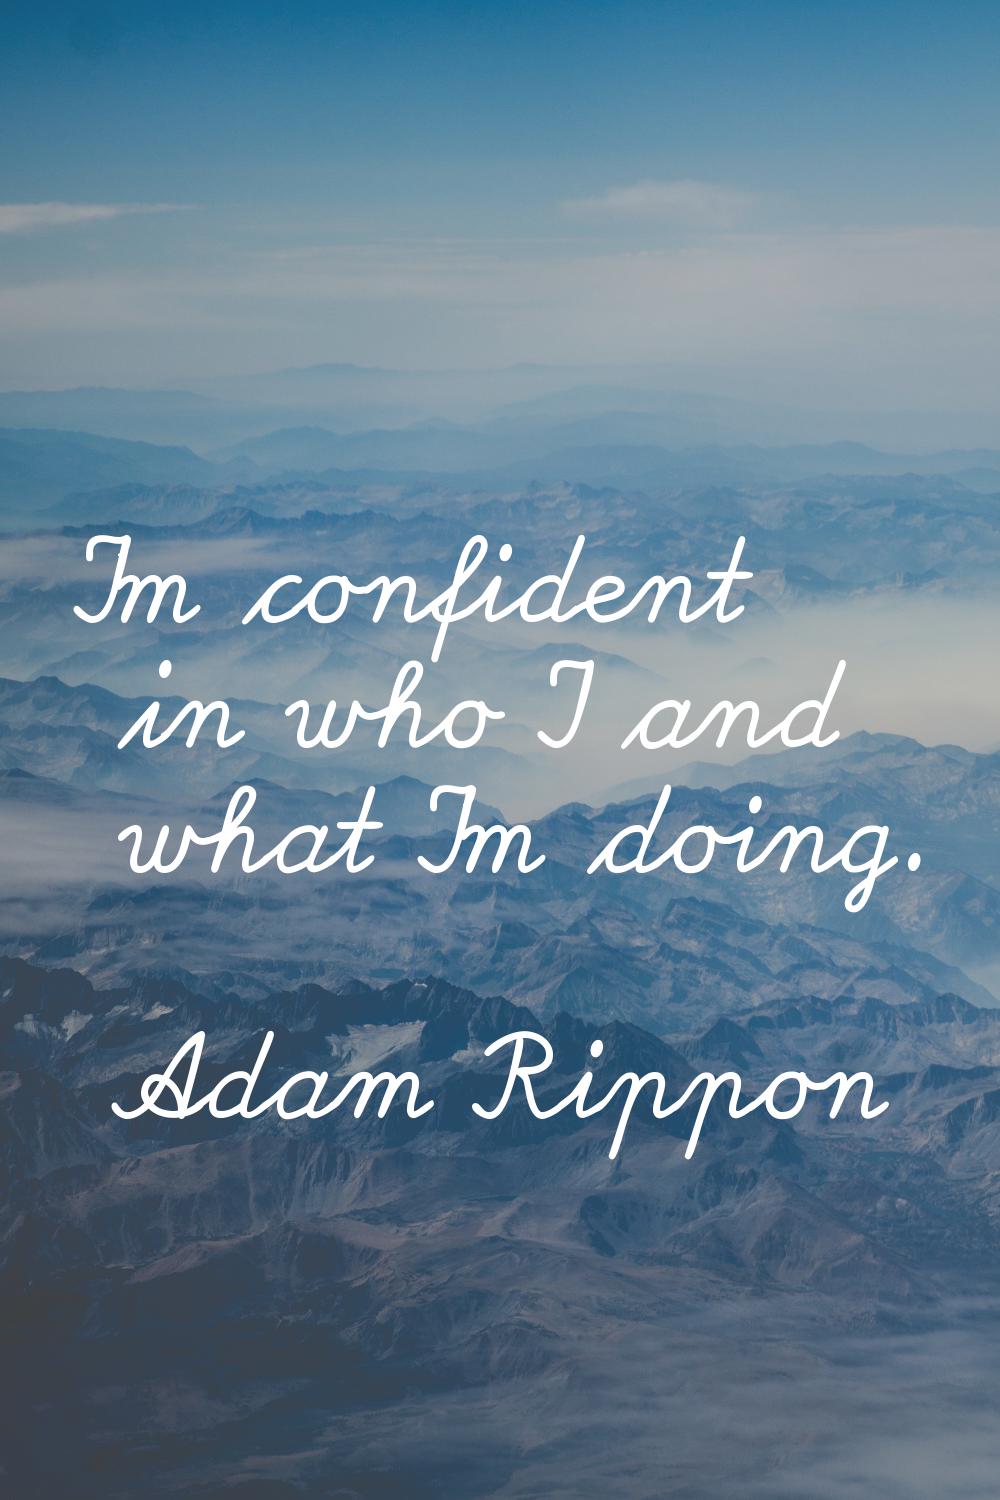 I'm confident in who I and what I'm doing.